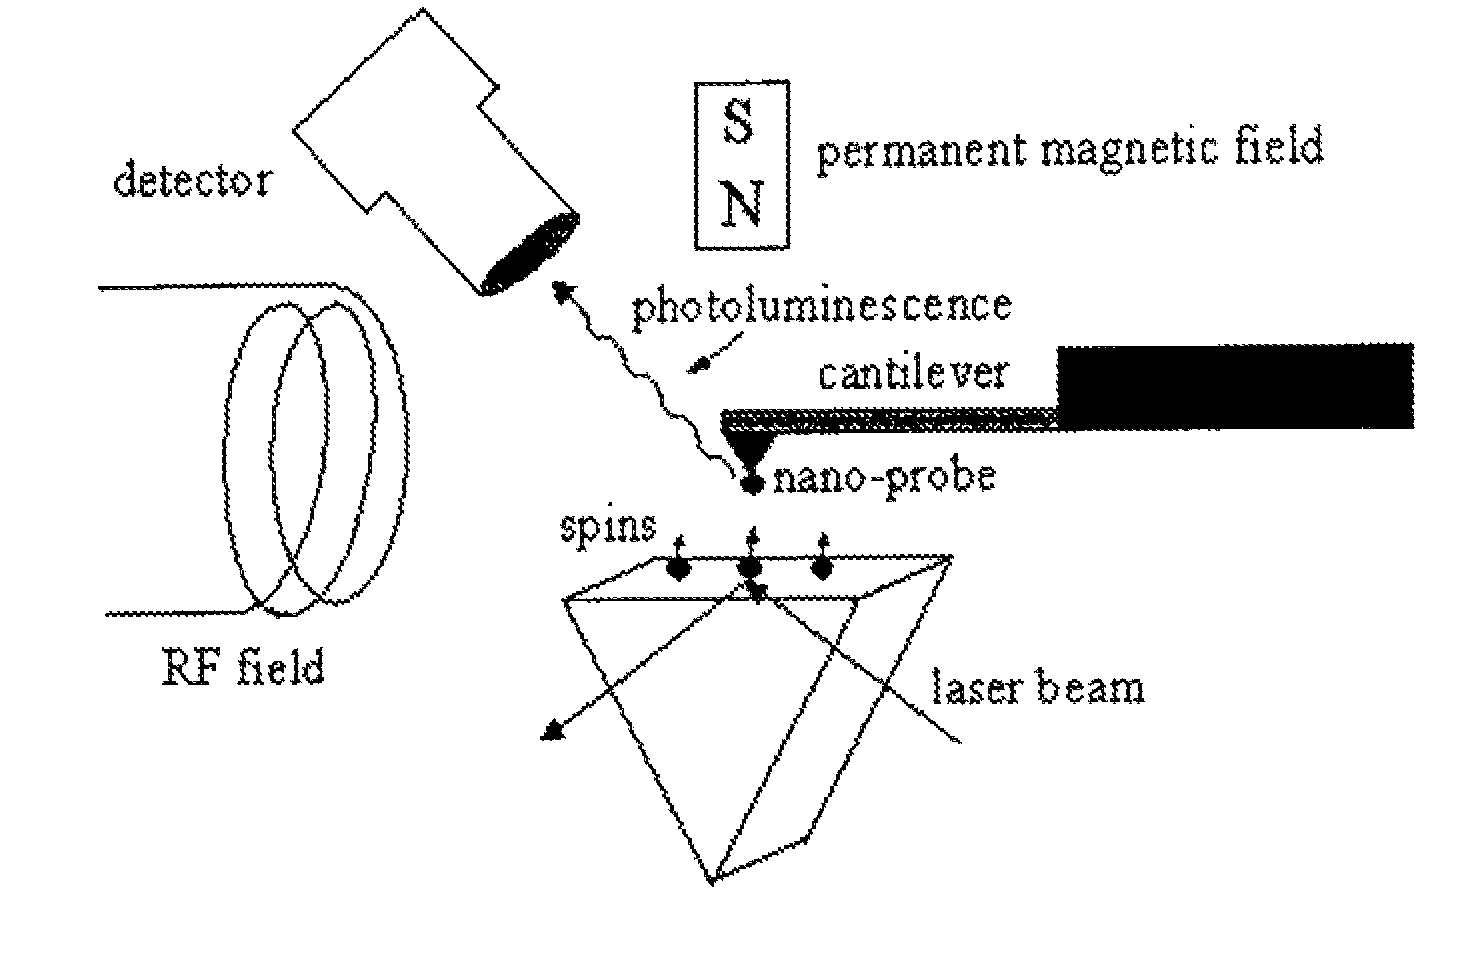 Spin microscope based on optically detected magnetic resonance